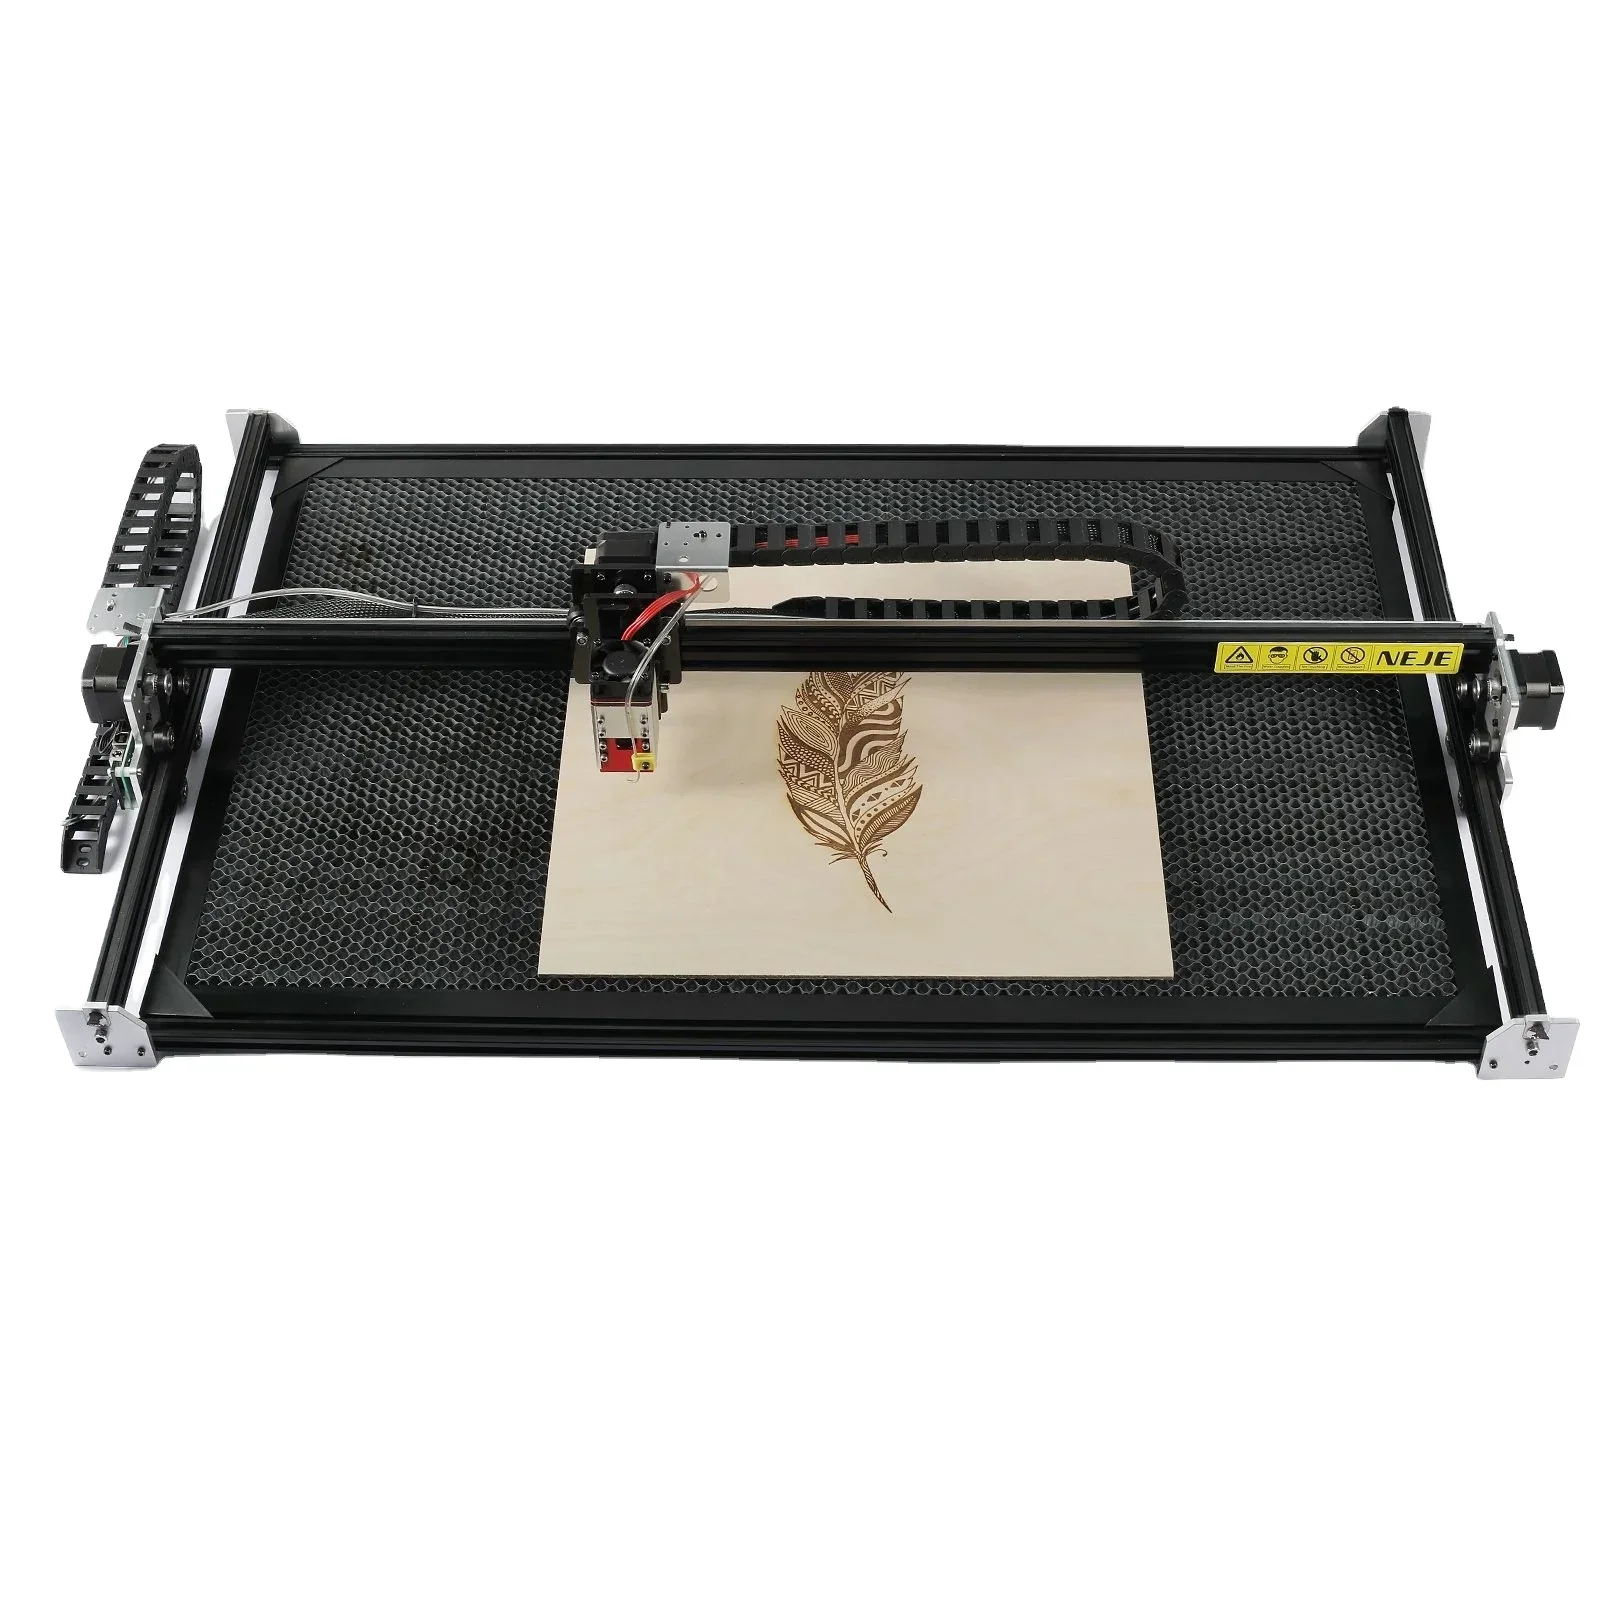 

Dropshipping 30W Laser Engraving Machine 460*810mm large area Wood Router Desktop CNC diode cutter